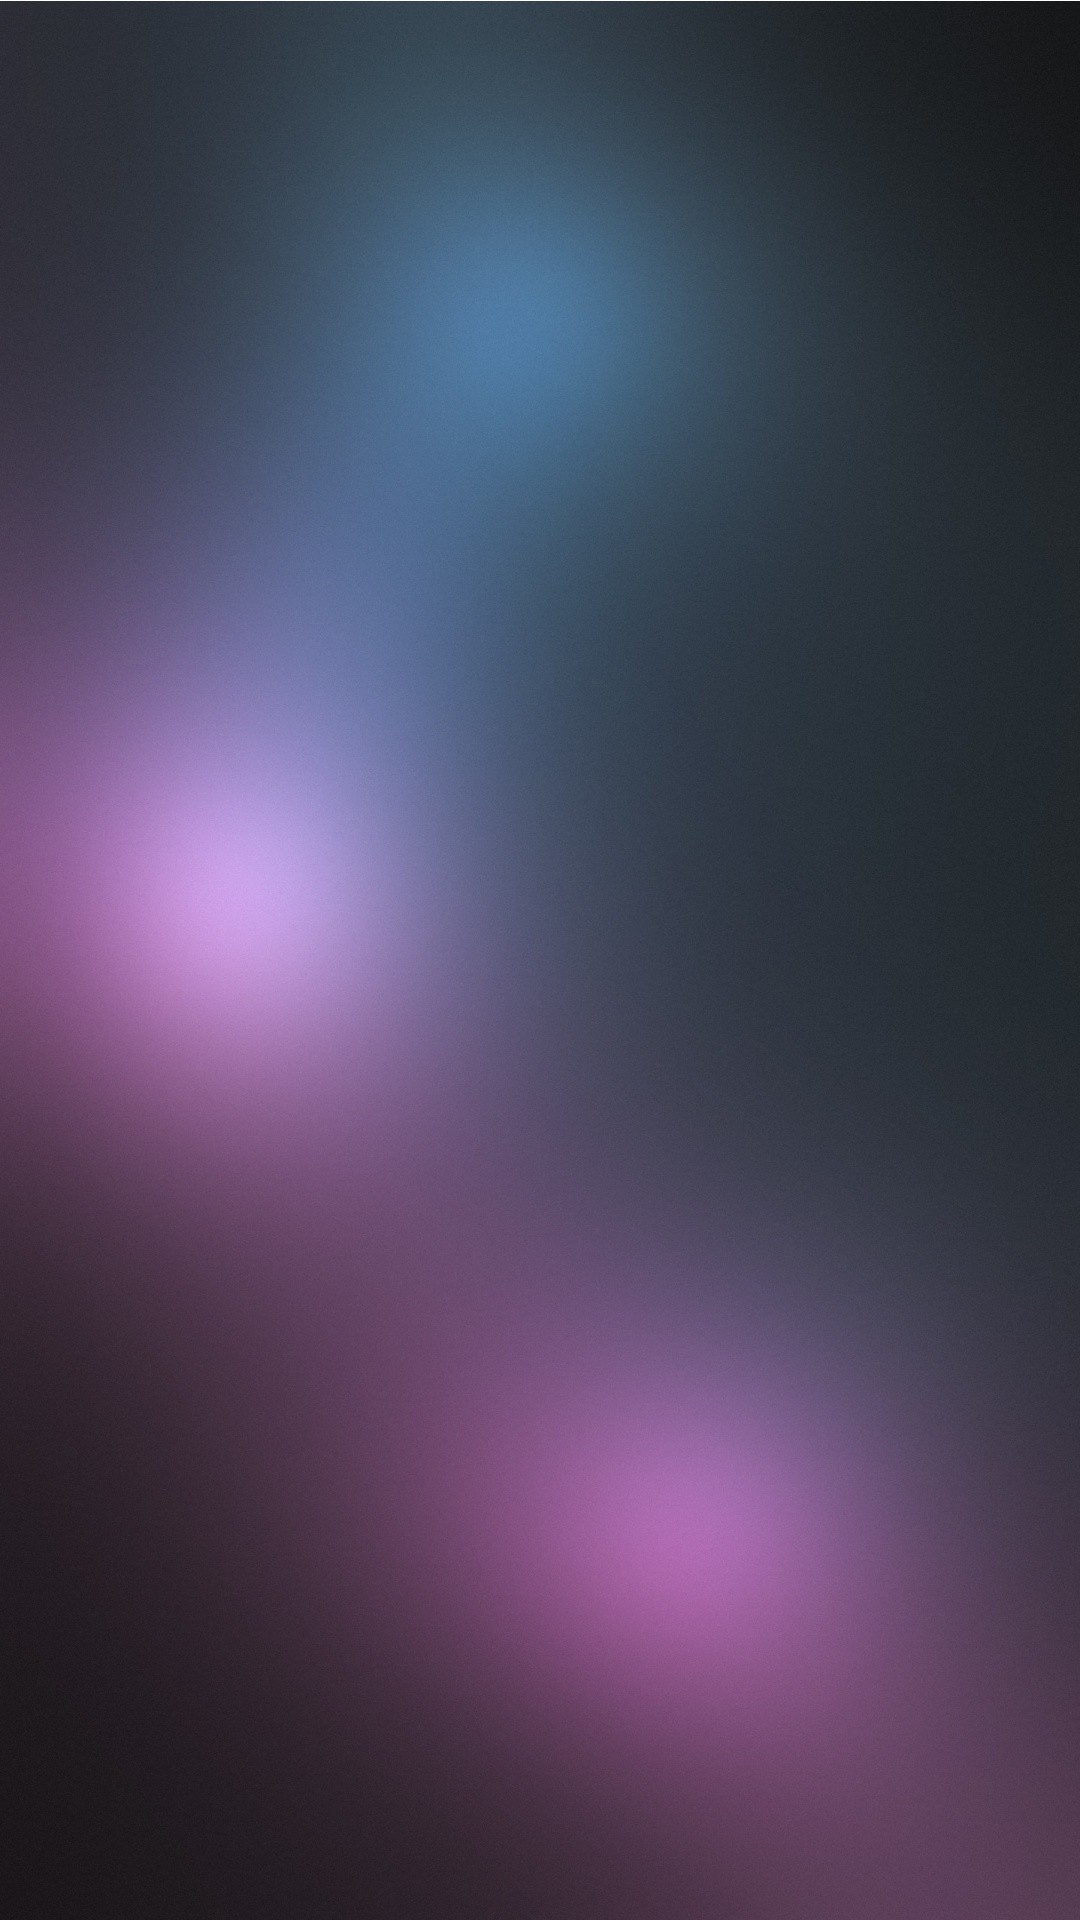 1080x1920 Wallpaper backgrounds Â· Blurred Violet Blue. 18 Calming blurred lights and  gradients wallpapers for iPhone - @mobile9